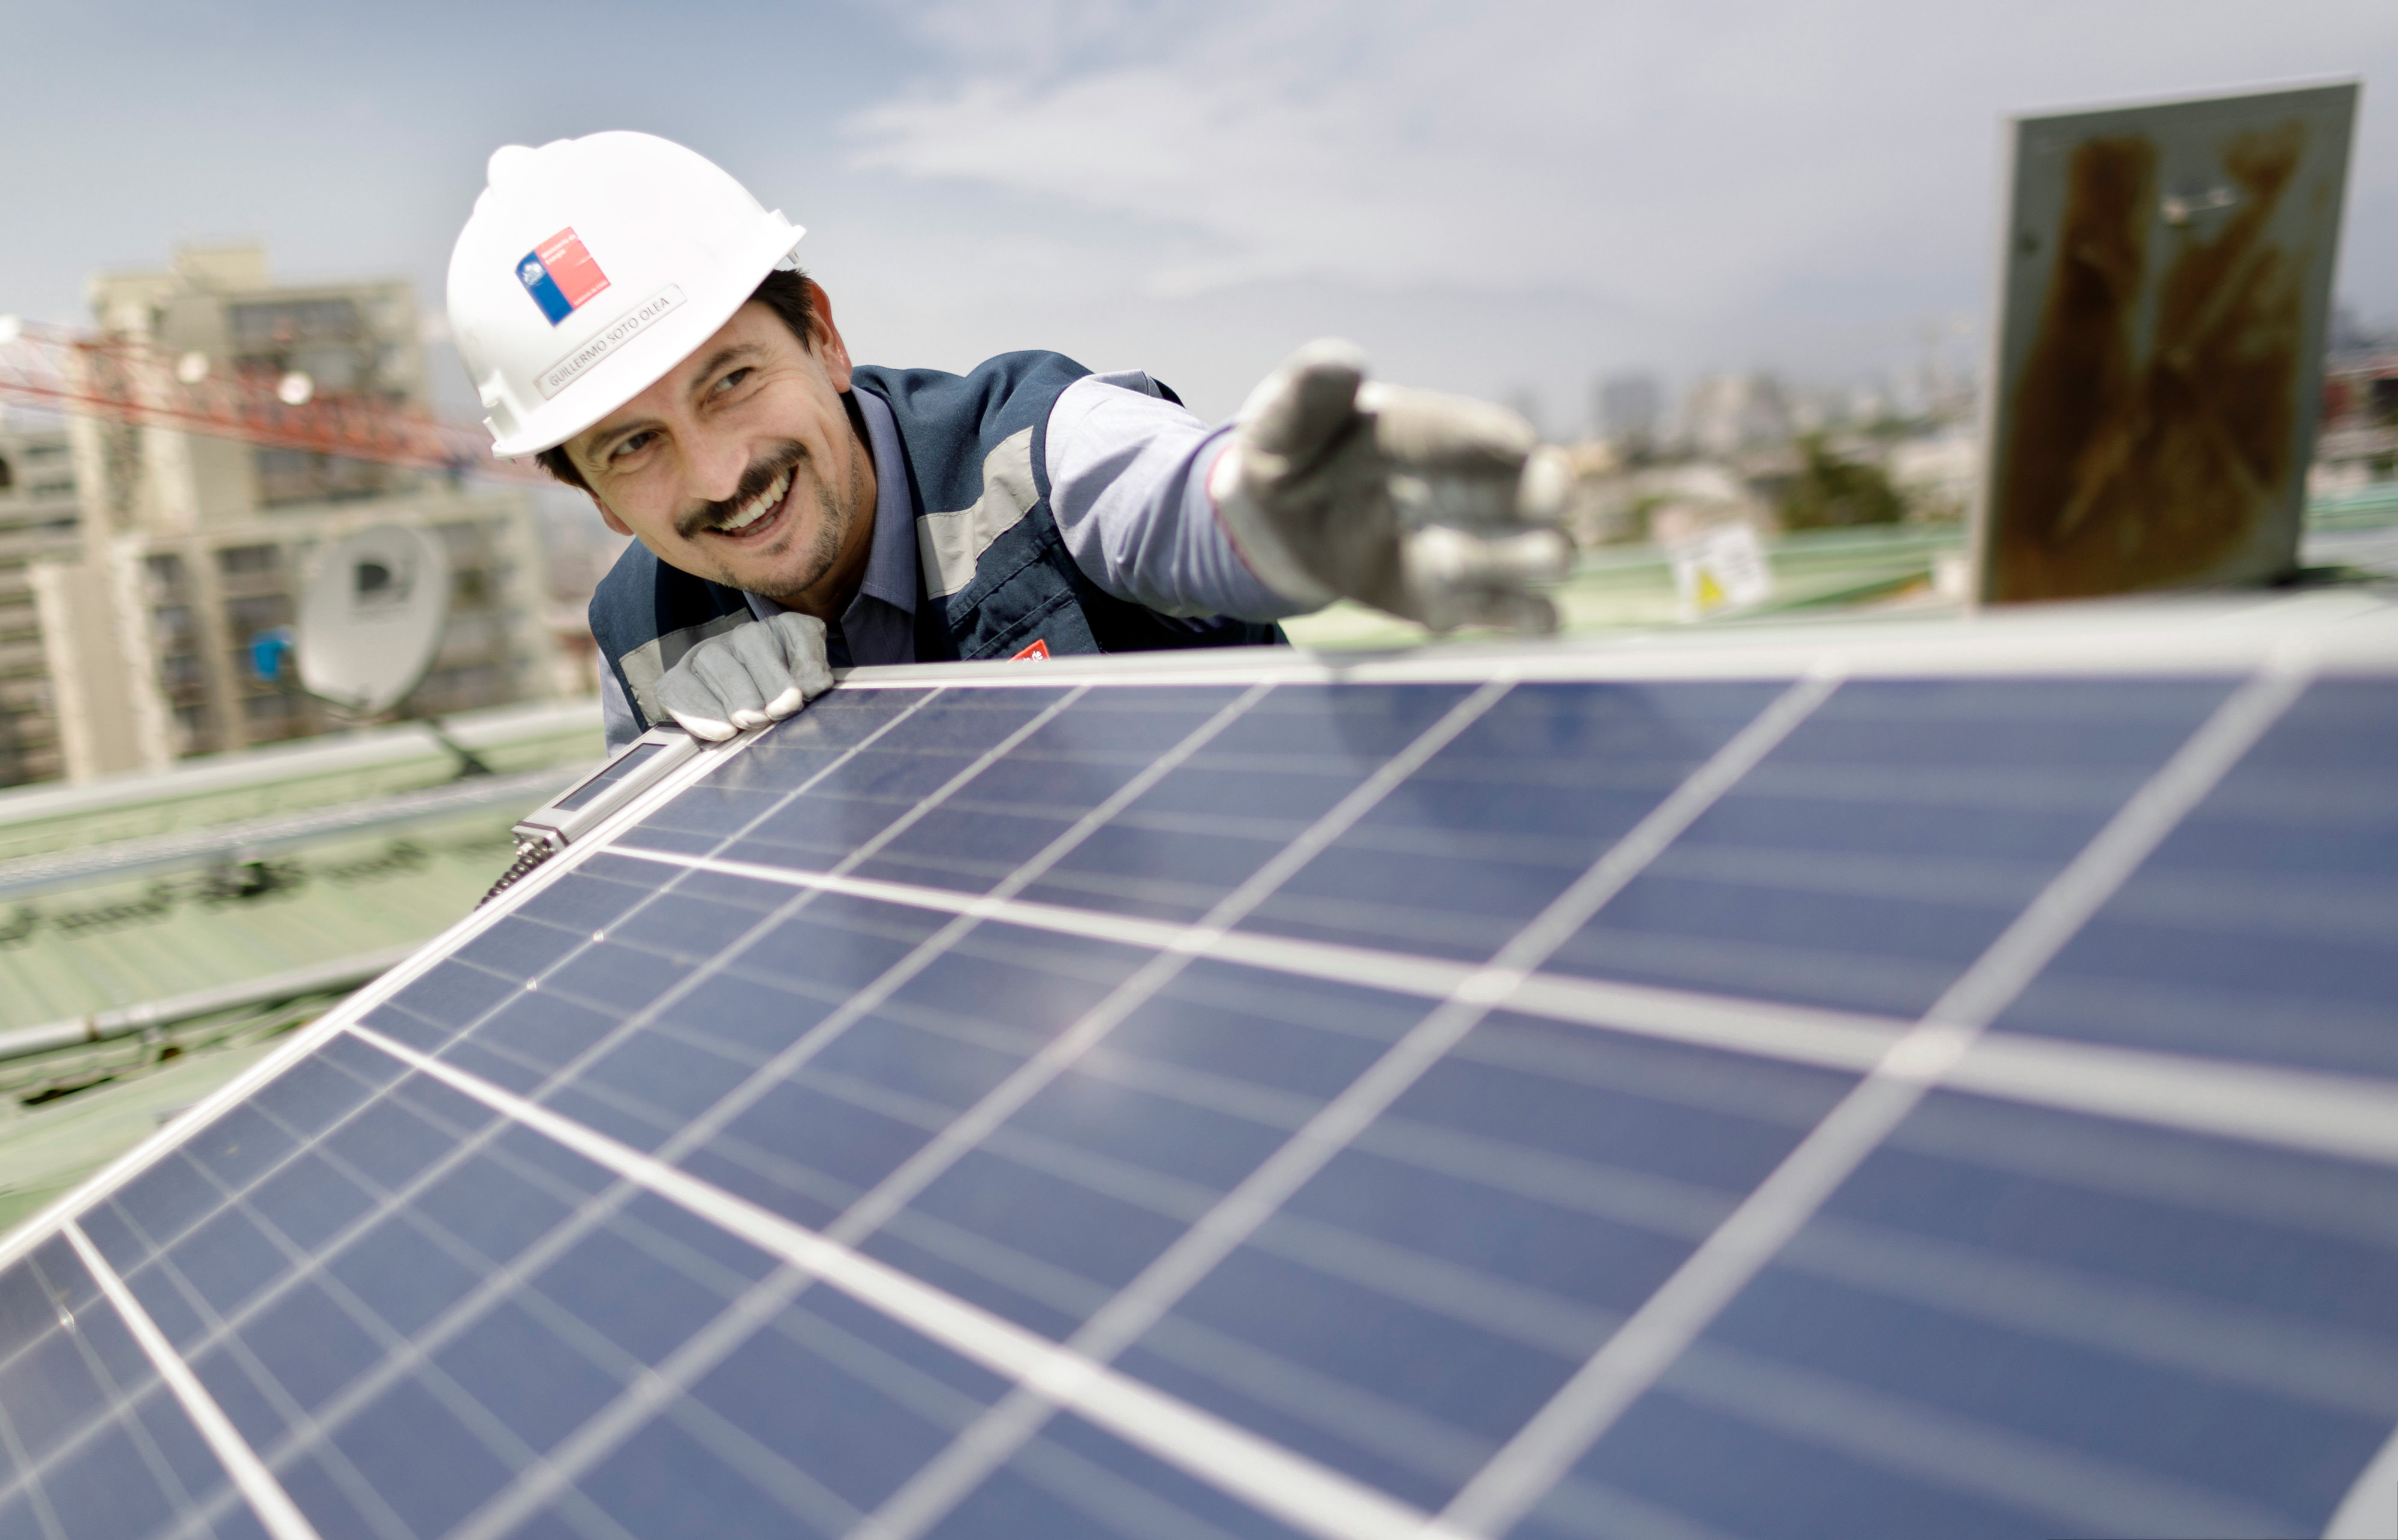 A worker checks a solar installation on a roof in Santiago de Chile.